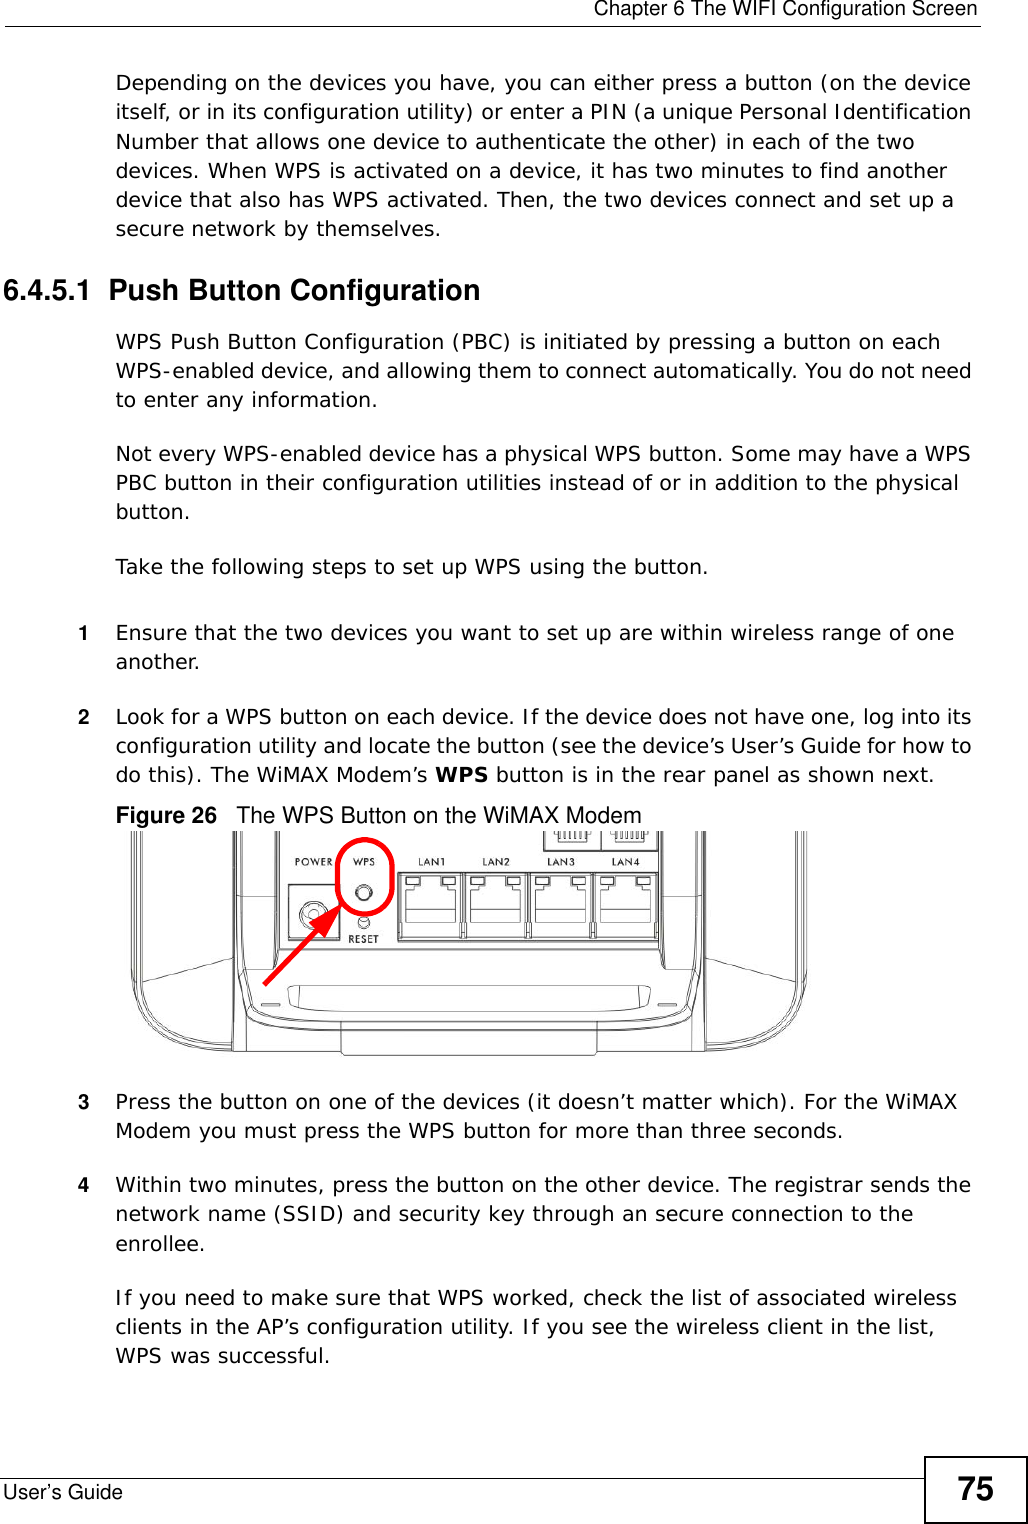  Chapter 6 The WIFI Configuration ScreenUser’s Guide 75Depending on the devices you have, you can either press a button (on the device itself, or in its configuration utility) or enter a PIN (a unique Personal Identification Number that allows one device to authenticate the other) in each of the two devices. When WPS is activated on a device, it has two minutes to find another device that also has WPS activated. Then, the two devices connect and set up a secure network by themselves.6.4.5.1  Push Button ConfigurationWPS Push Button Configuration (PBC) is initiated by pressing a button on each WPS-enabled device, and allowing them to connect automatically. You do not need to enter any information. Not every WPS-enabled device has a physical WPS button. Some may have a WPS PBC button in their configuration utilities instead of or in addition to the physical button.Take the following steps to set up WPS using the button.1Ensure that the two devices you want to set up are within wireless range of one another. 2Look for a WPS button on each device. If the device does not have one, log into its configuration utility and locate the button (see the device’s User’s Guide for how to do this). The WiMAX Modem’s WPS button is in the rear panel as shown next.Figure 26   The WPS Button on the WiMAX Modem3Press the button on one of the devices (it doesn’t matter which). For the WiMAX Modem you must press the WPS button for more than three seconds.4Within two minutes, press the button on the other device. The registrar sends the network name (SSID) and security key through an secure connection to the enrollee.If you need to make sure that WPS worked, check the list of associated wireless clients in the AP’s configuration utility. If you see the wireless client in the list, WPS was successful.